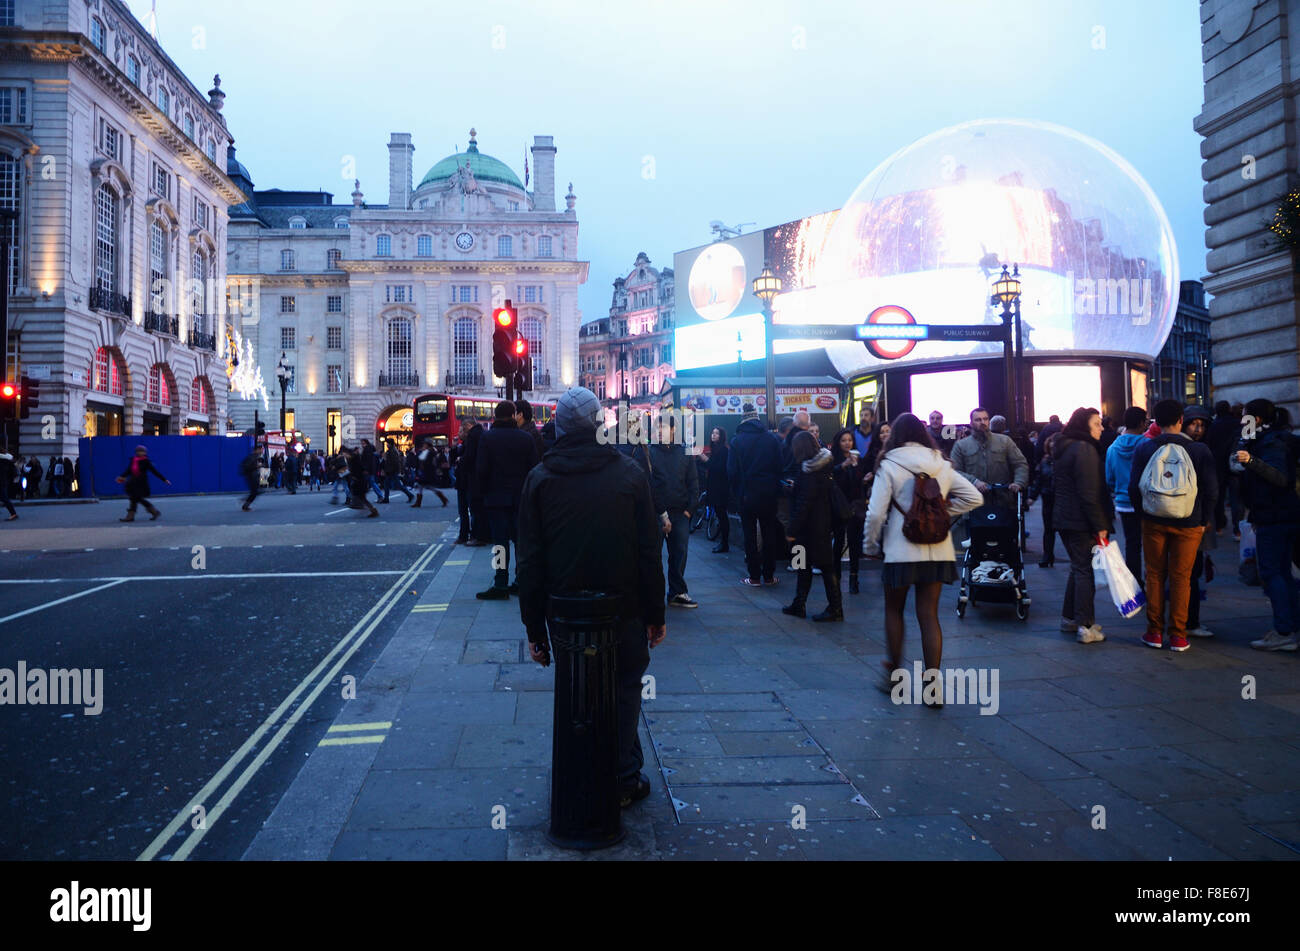 People and traffic in Picadilly Circus, Famous public space in London's West End. London, England, United Kingdom Stock Photo